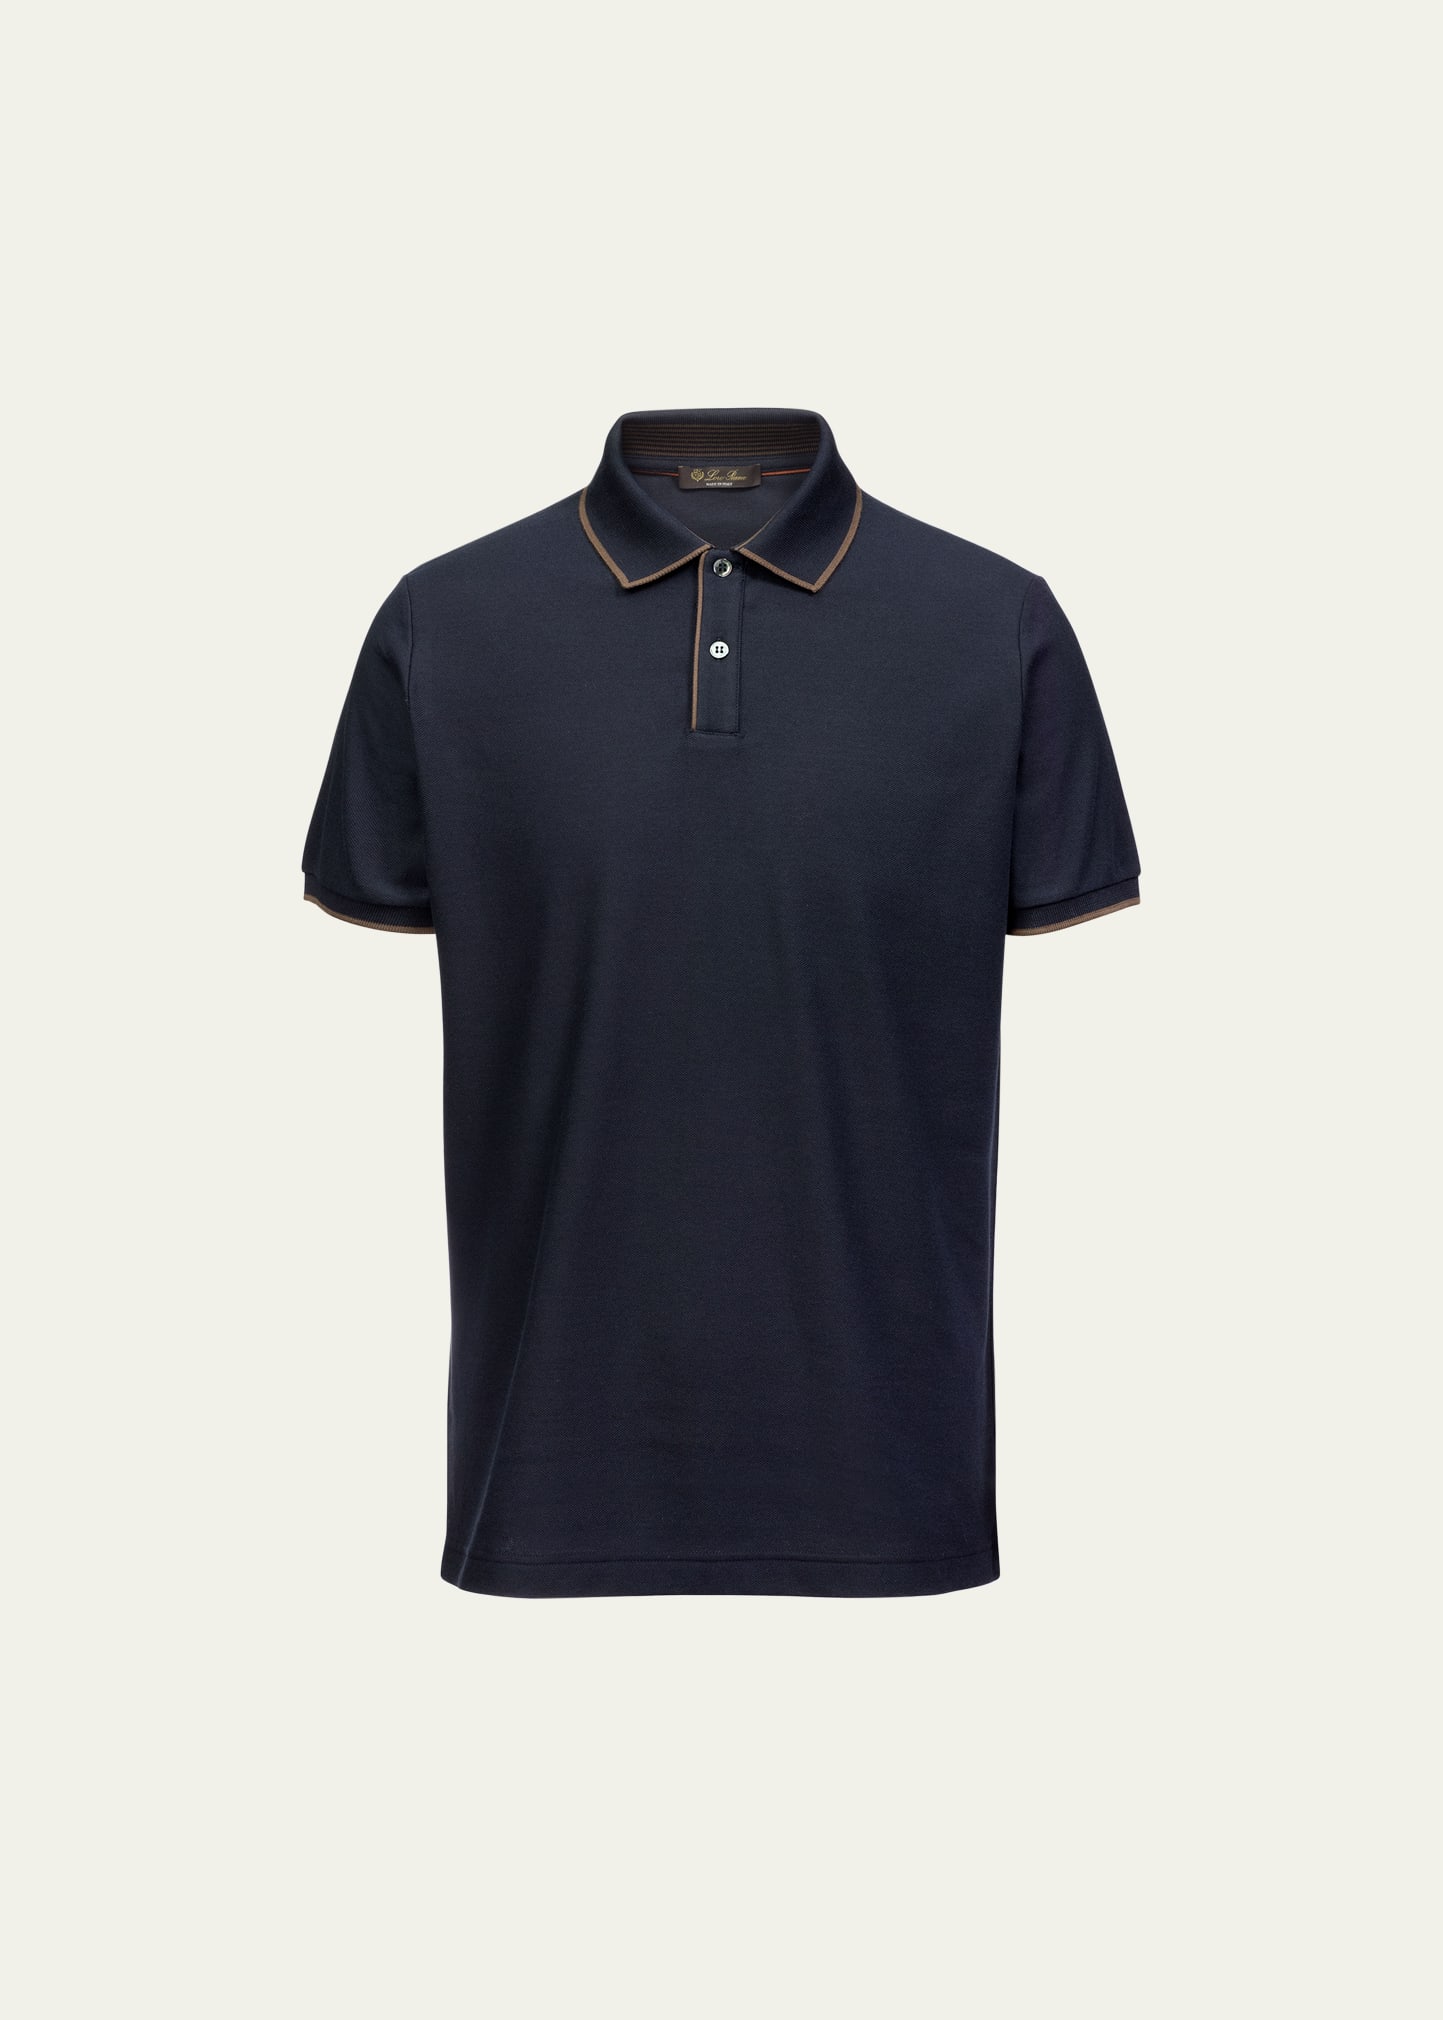 Loro Piana Men's Brentwood Tipped Jersey Pique Polo Shirt In Navy